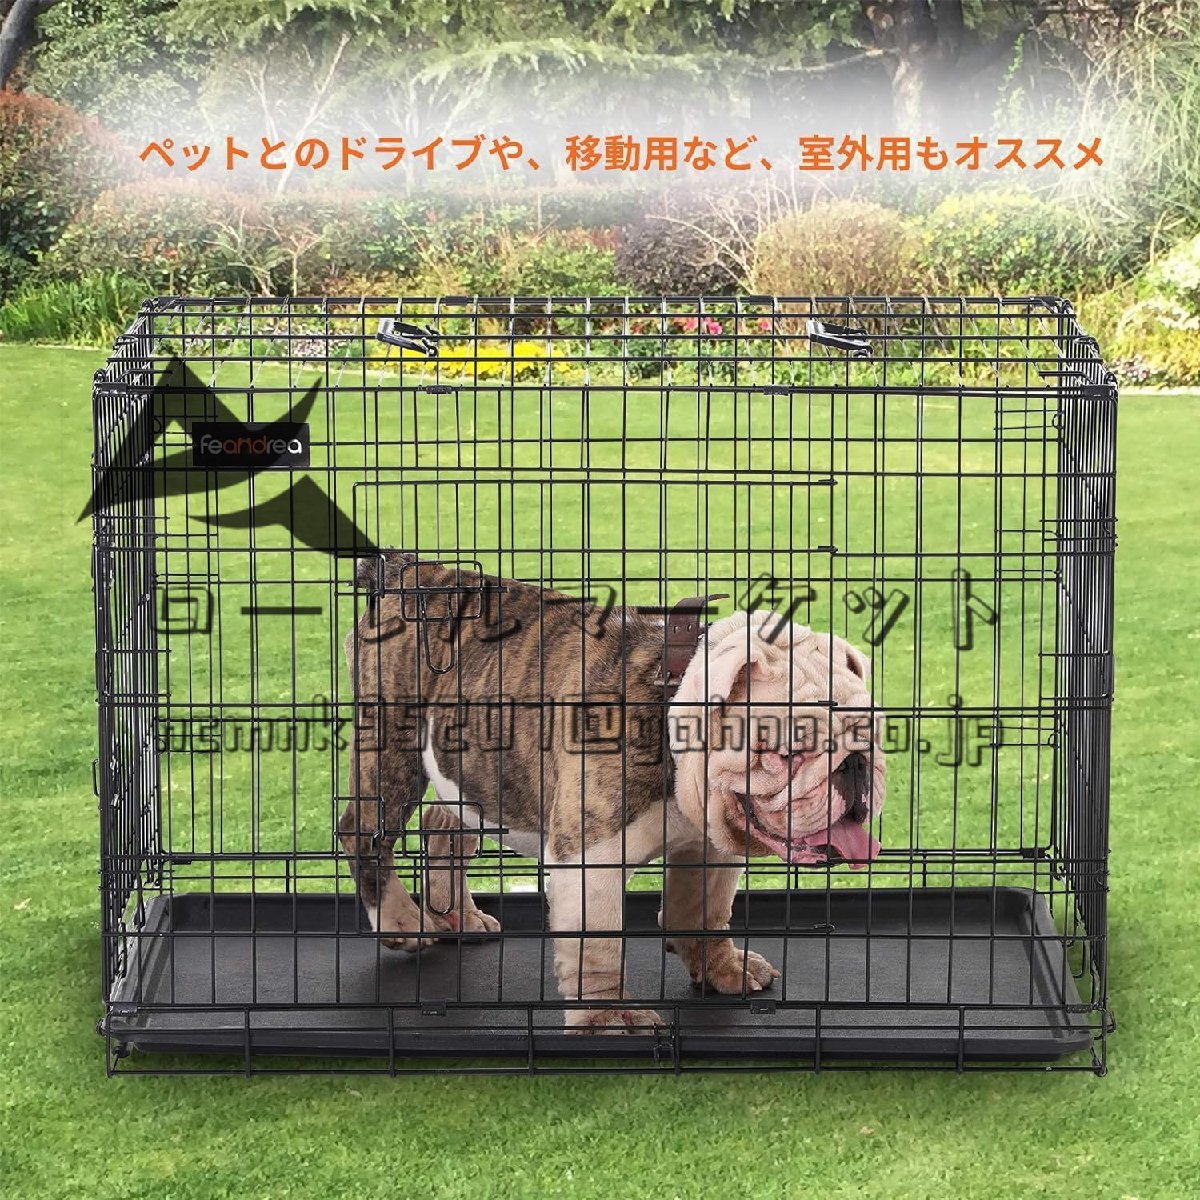  pet cage 92.5x57.5x64cm dog cage pet house . entering .2. interior out combined use folding possible 